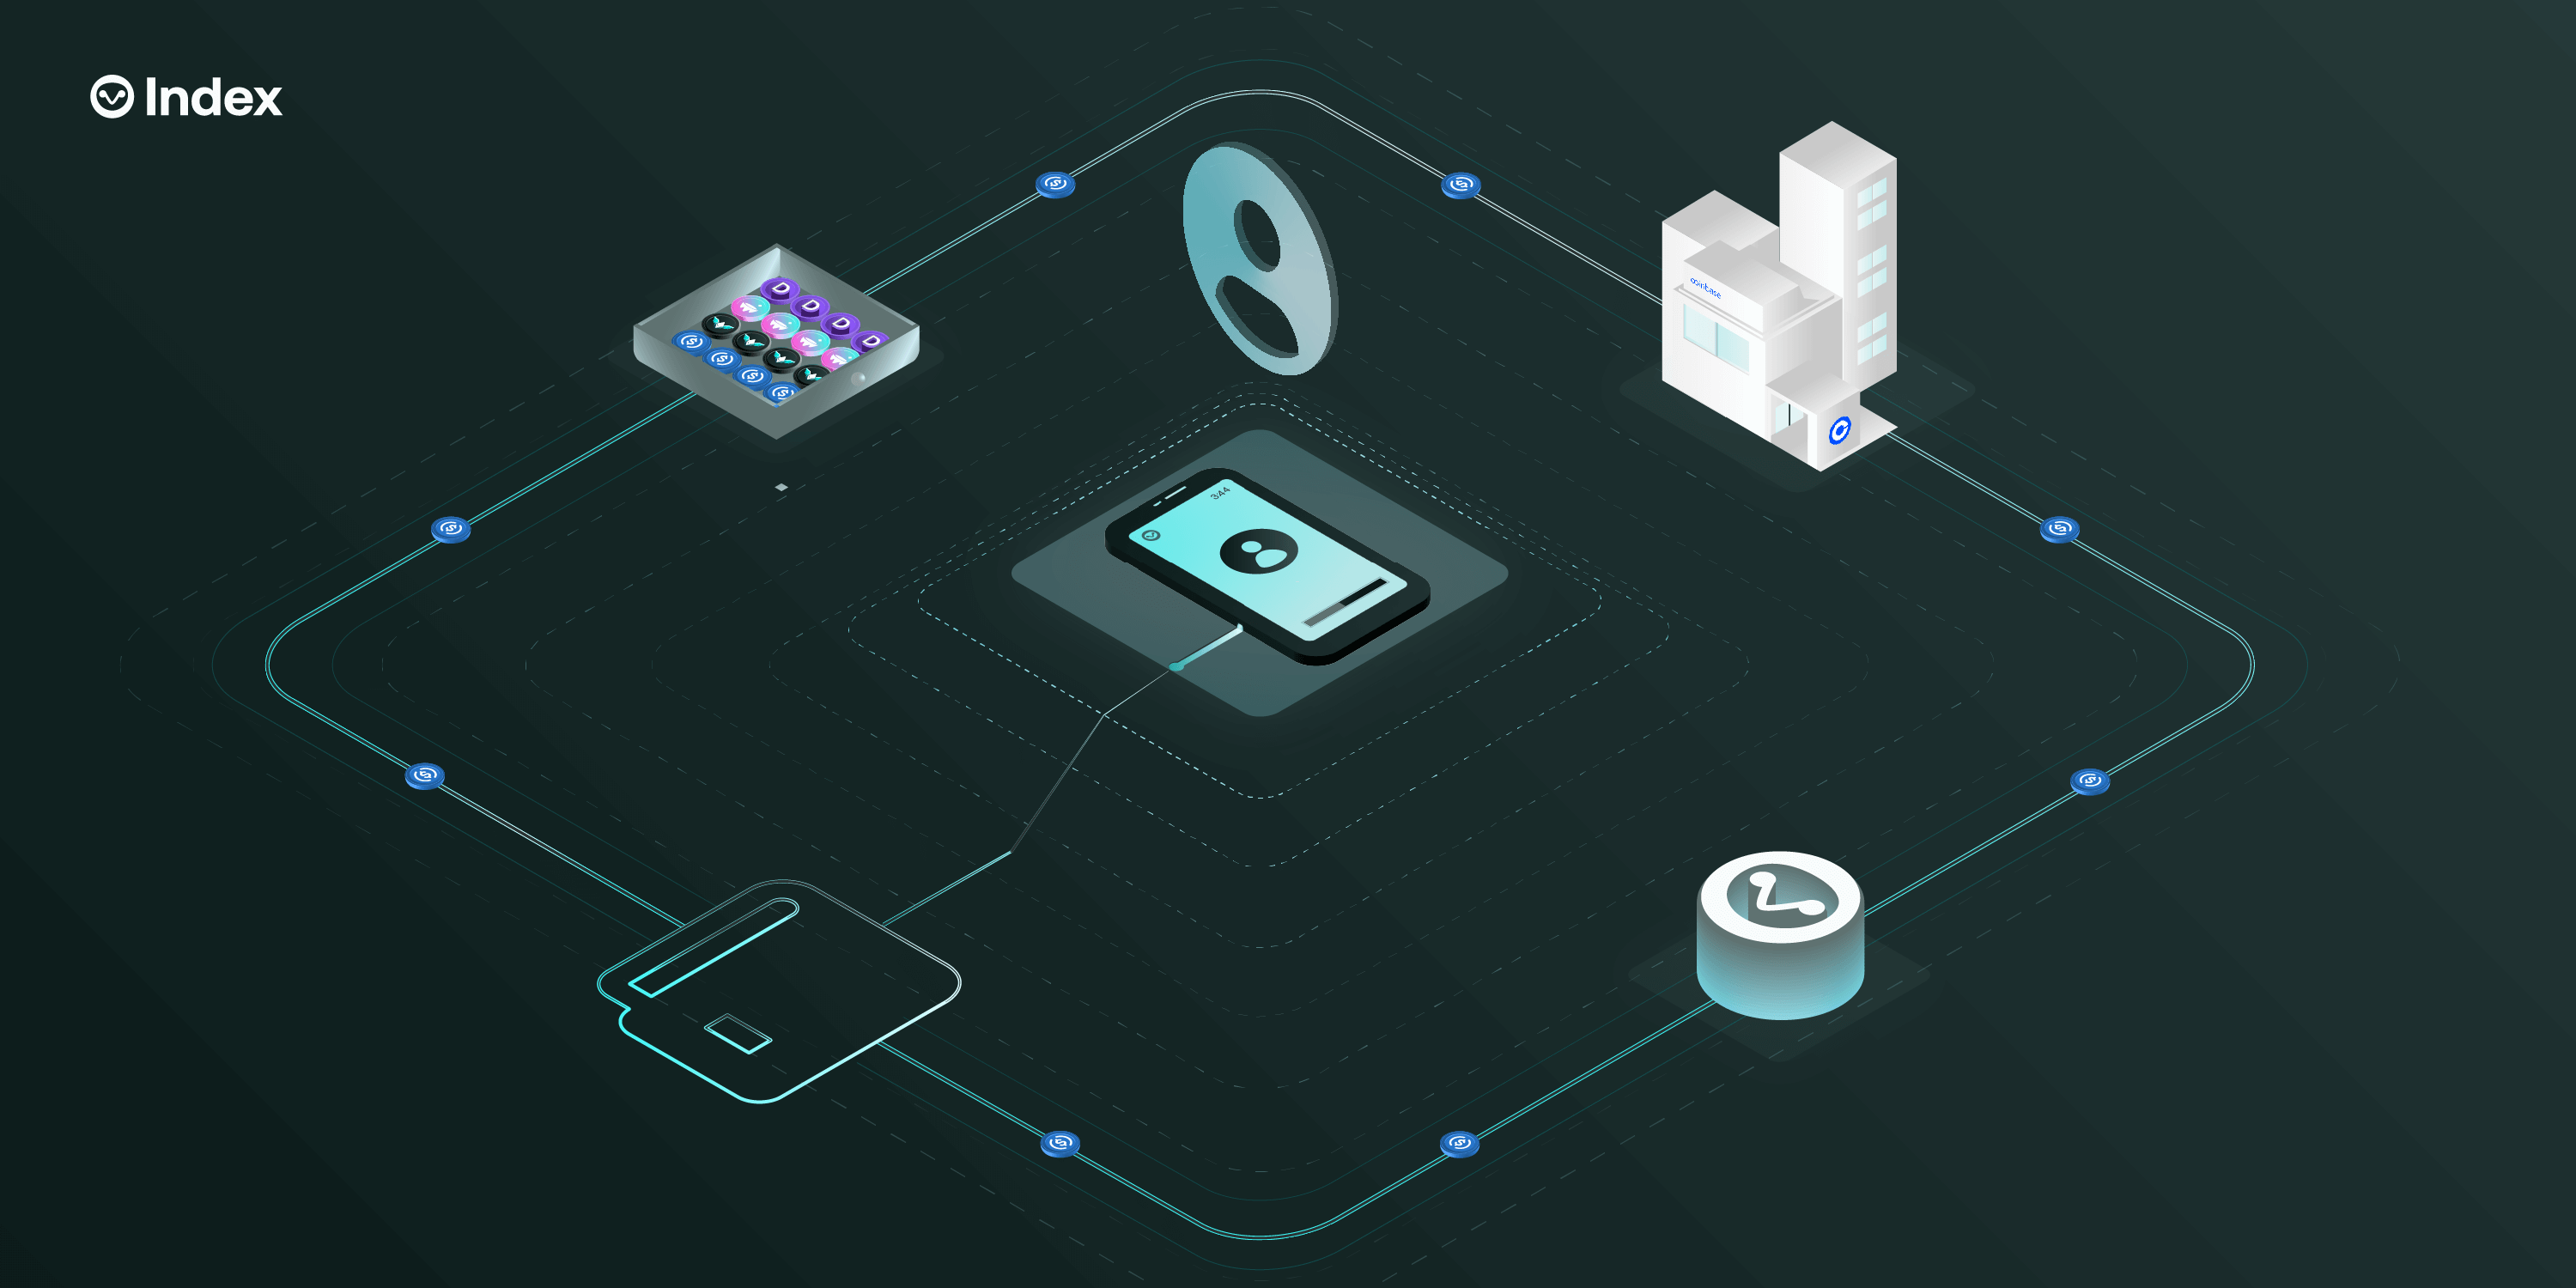 institutions products and phone connected to blockchain wallet and index coop logo interconnected against dark blue background